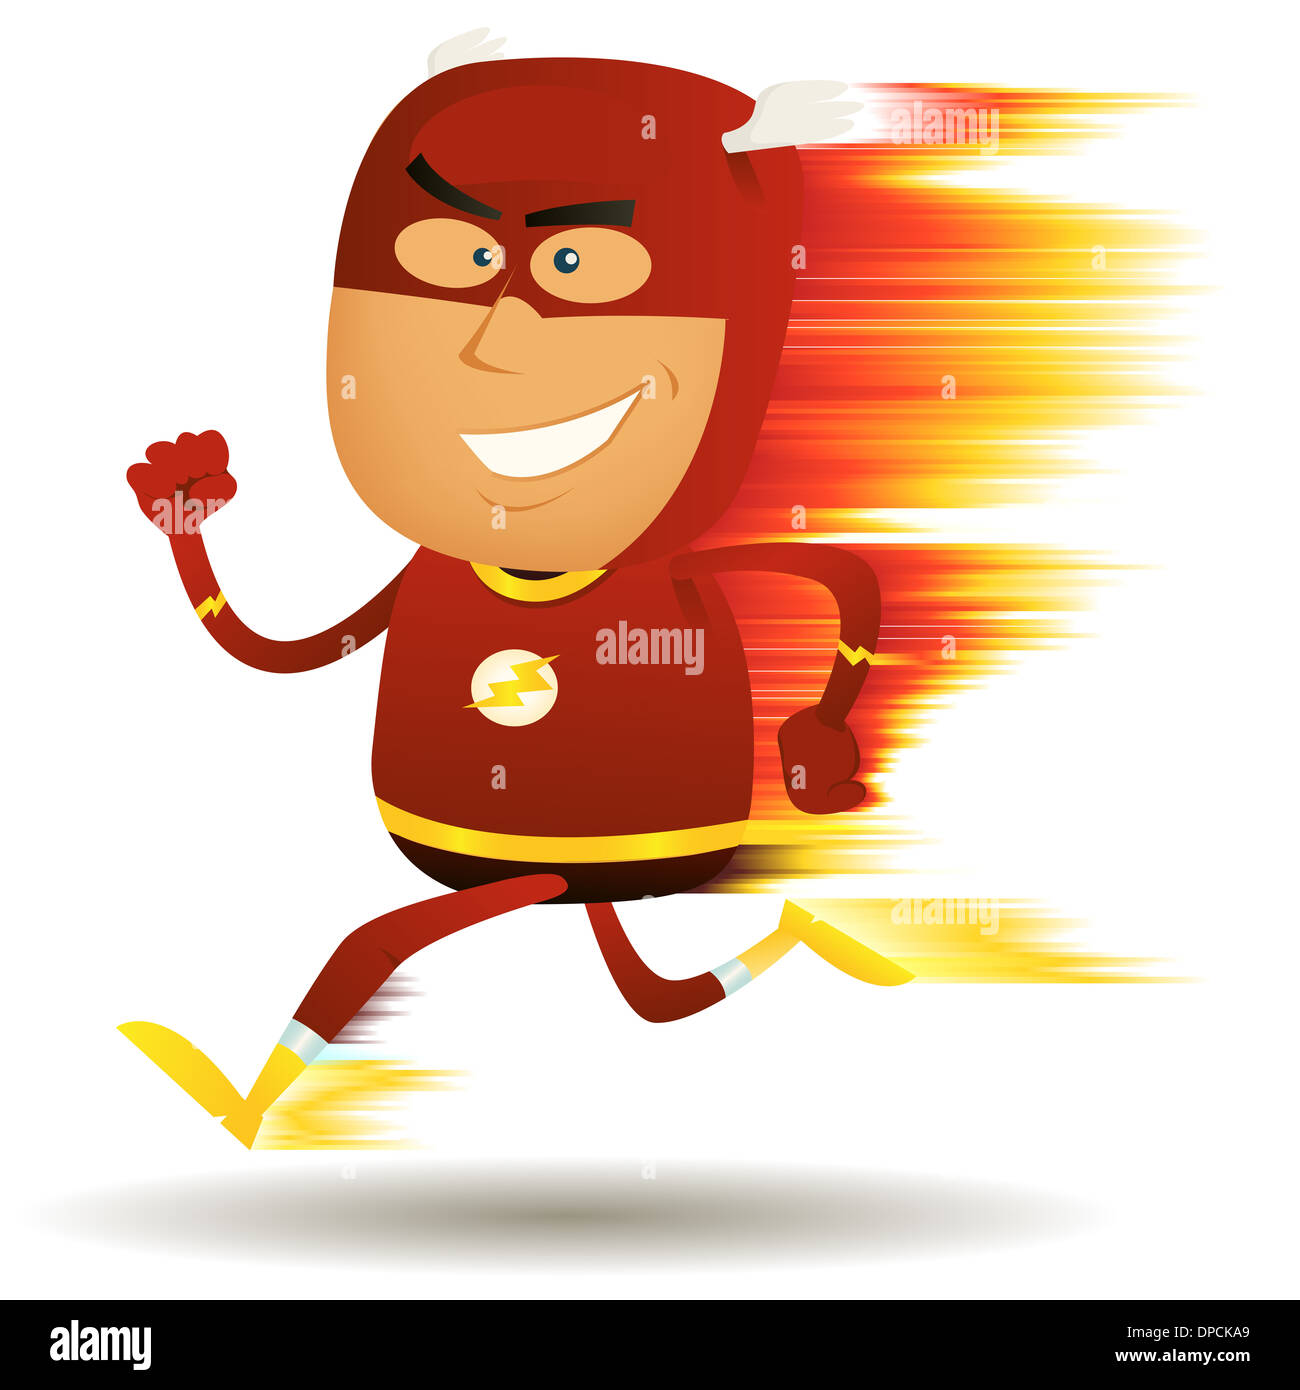 The Flash Superhero High Resolution Stock Photography And Images Alamy